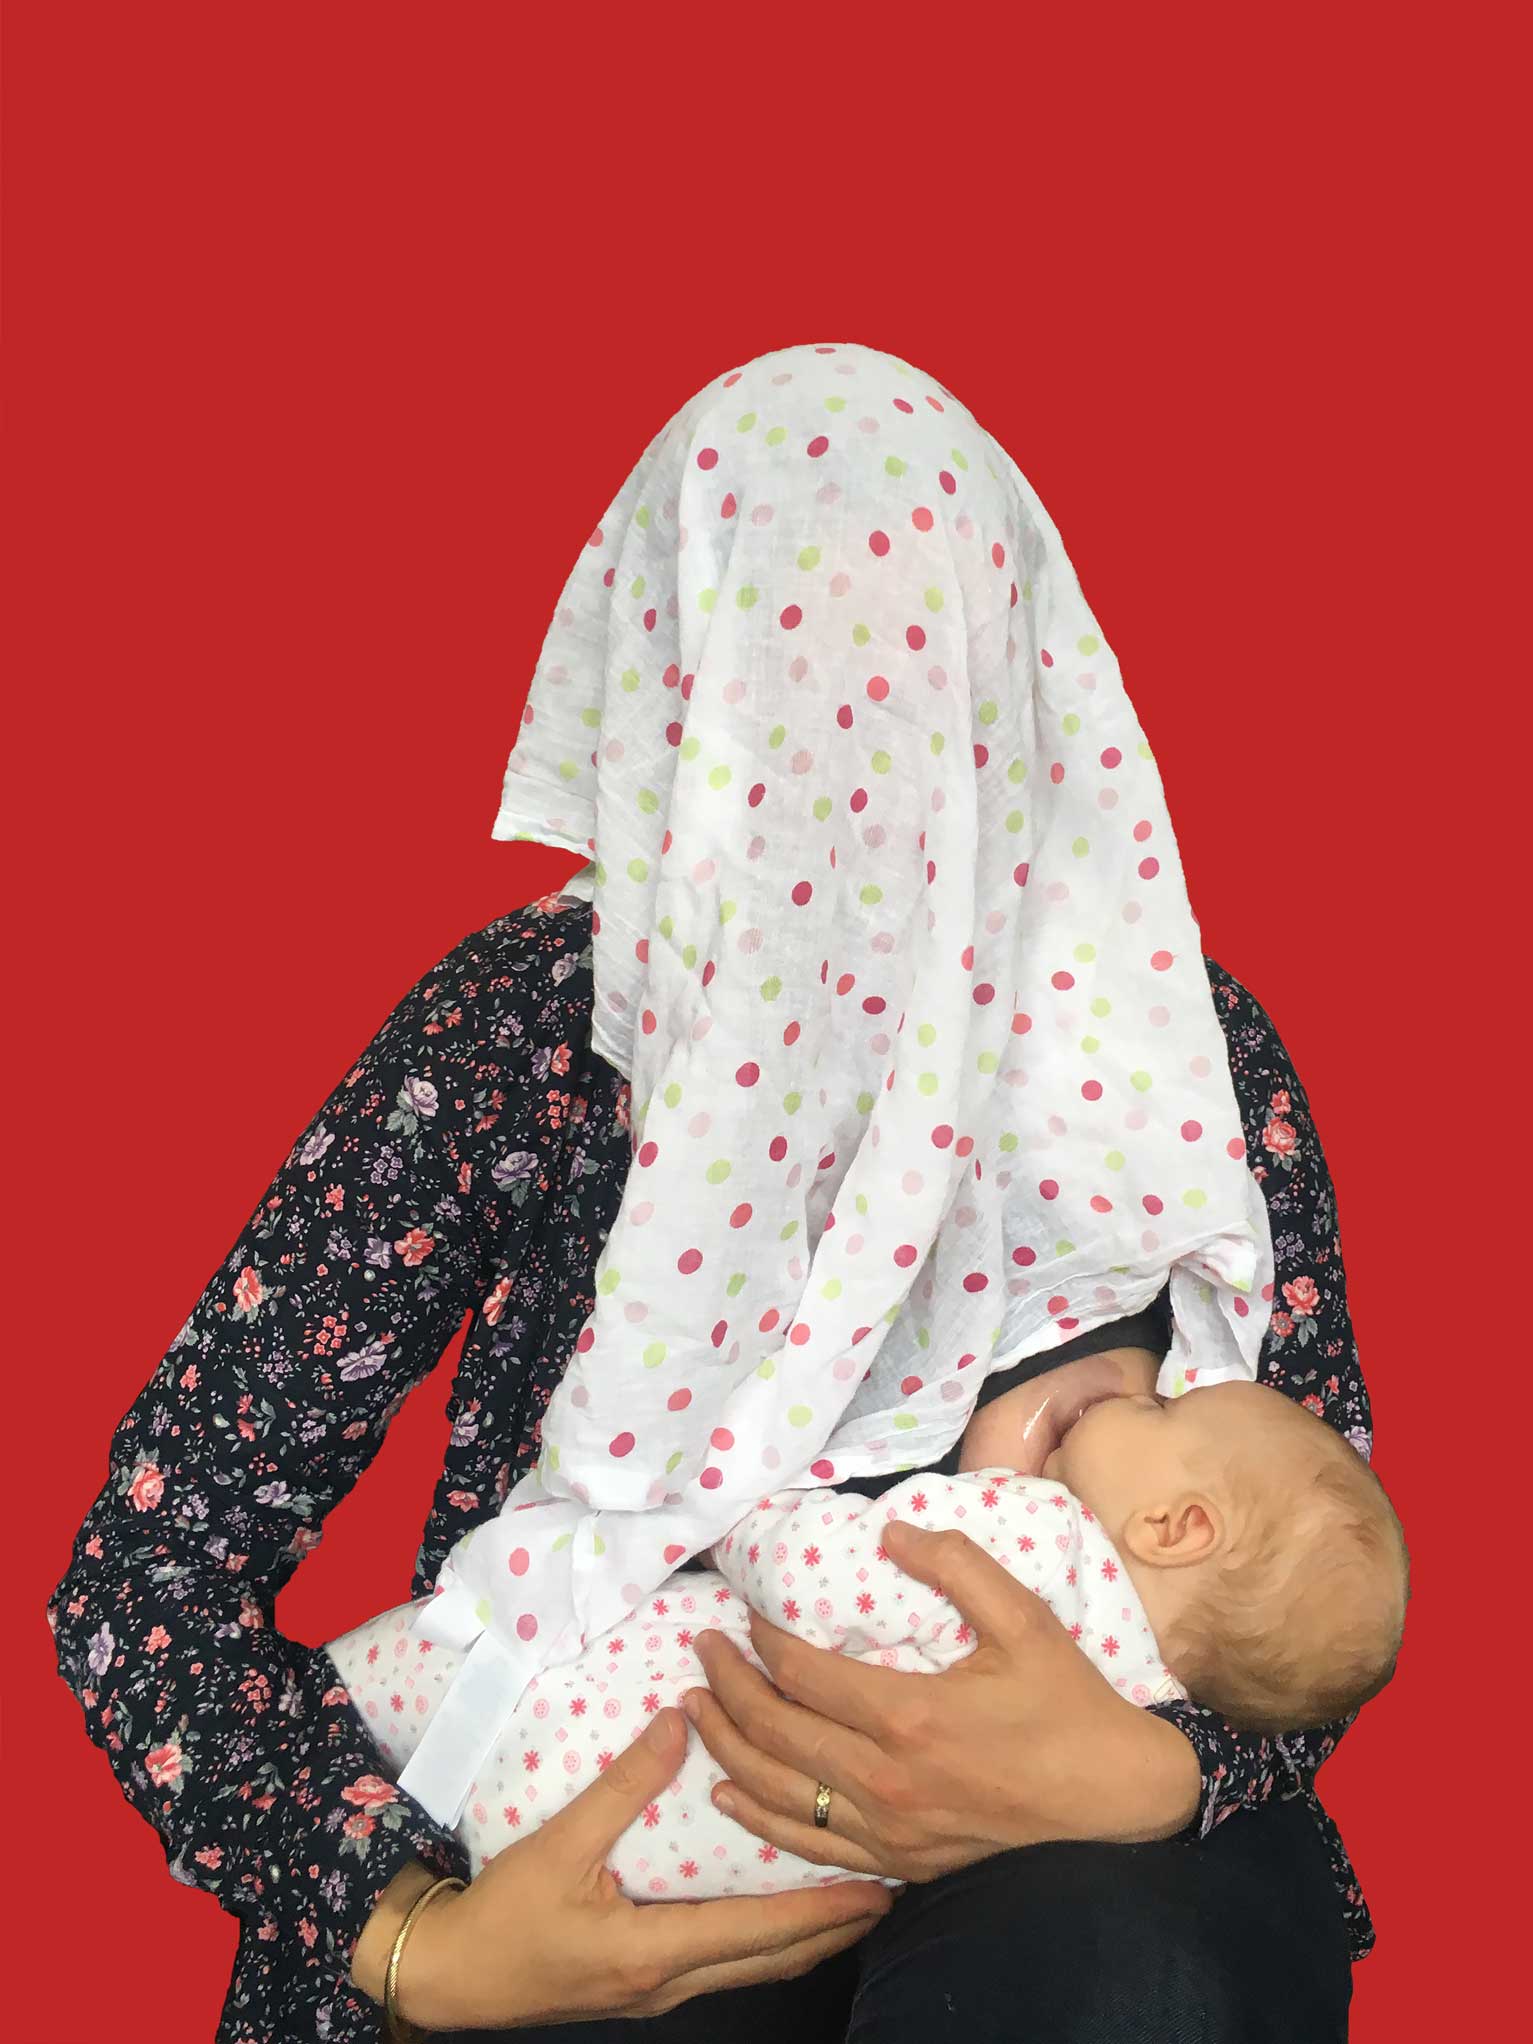 Mother breastfeeding baby in red Mass Isolation Australia photography project